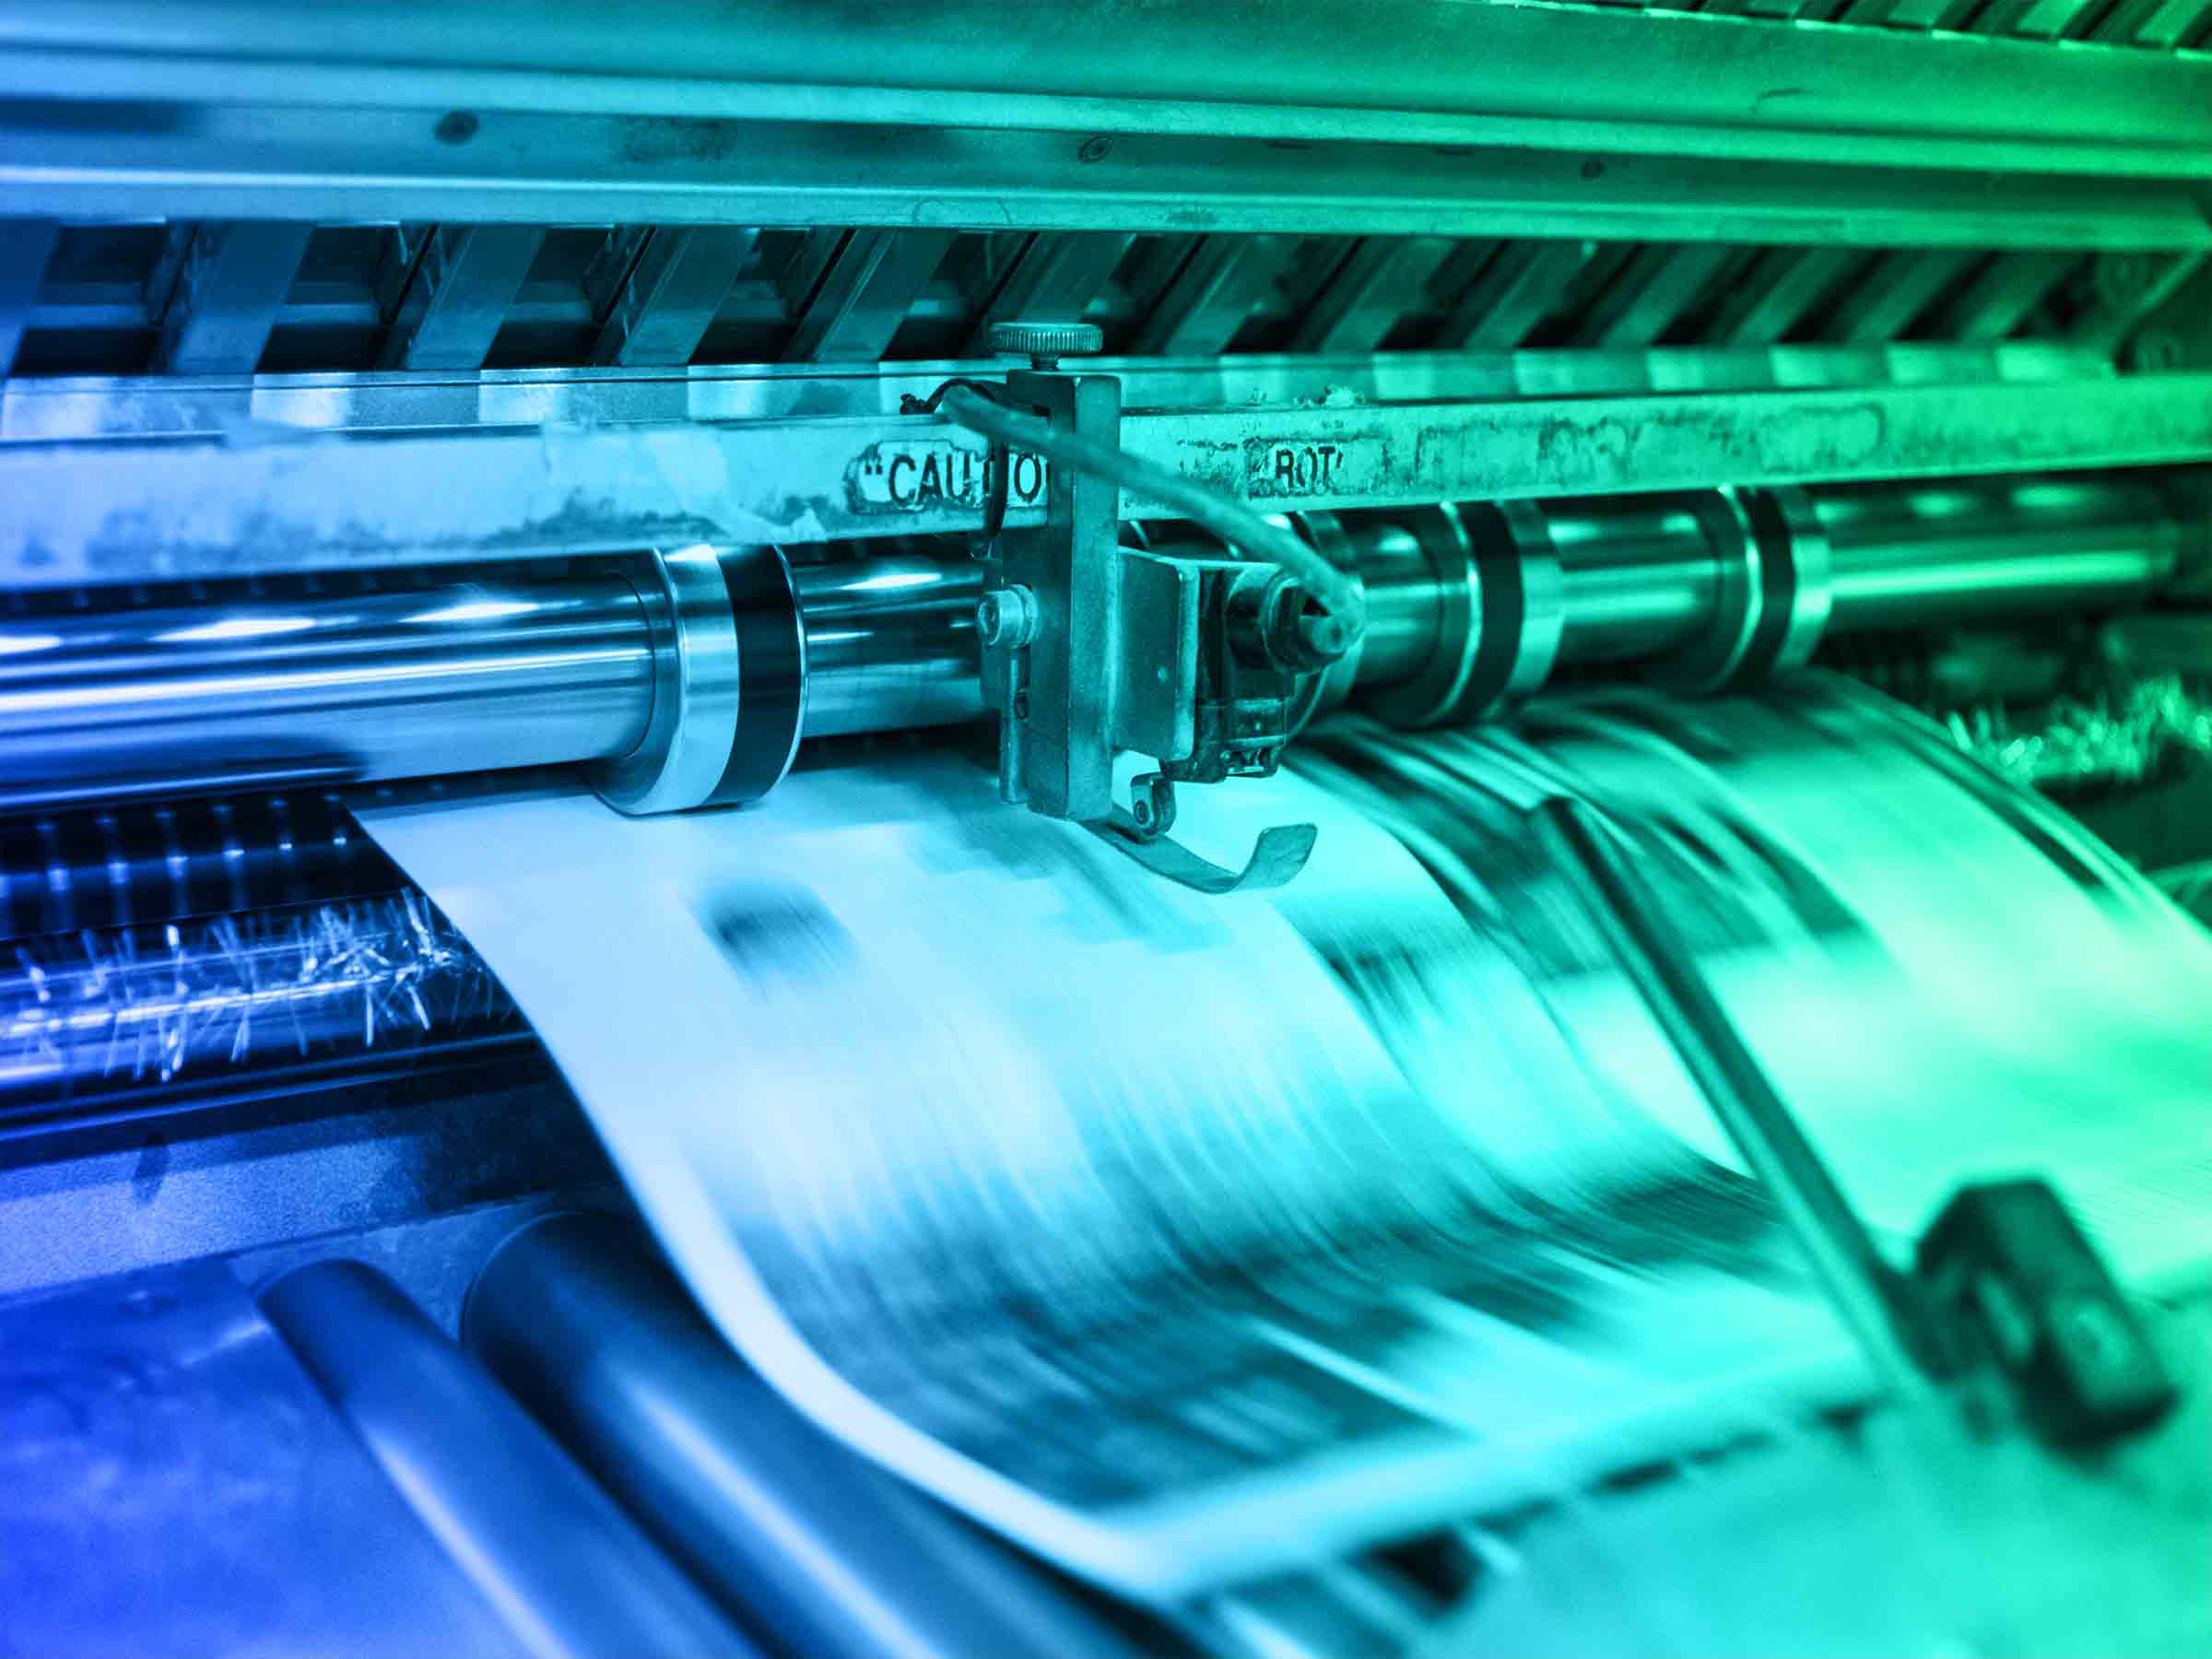 commercial printing press